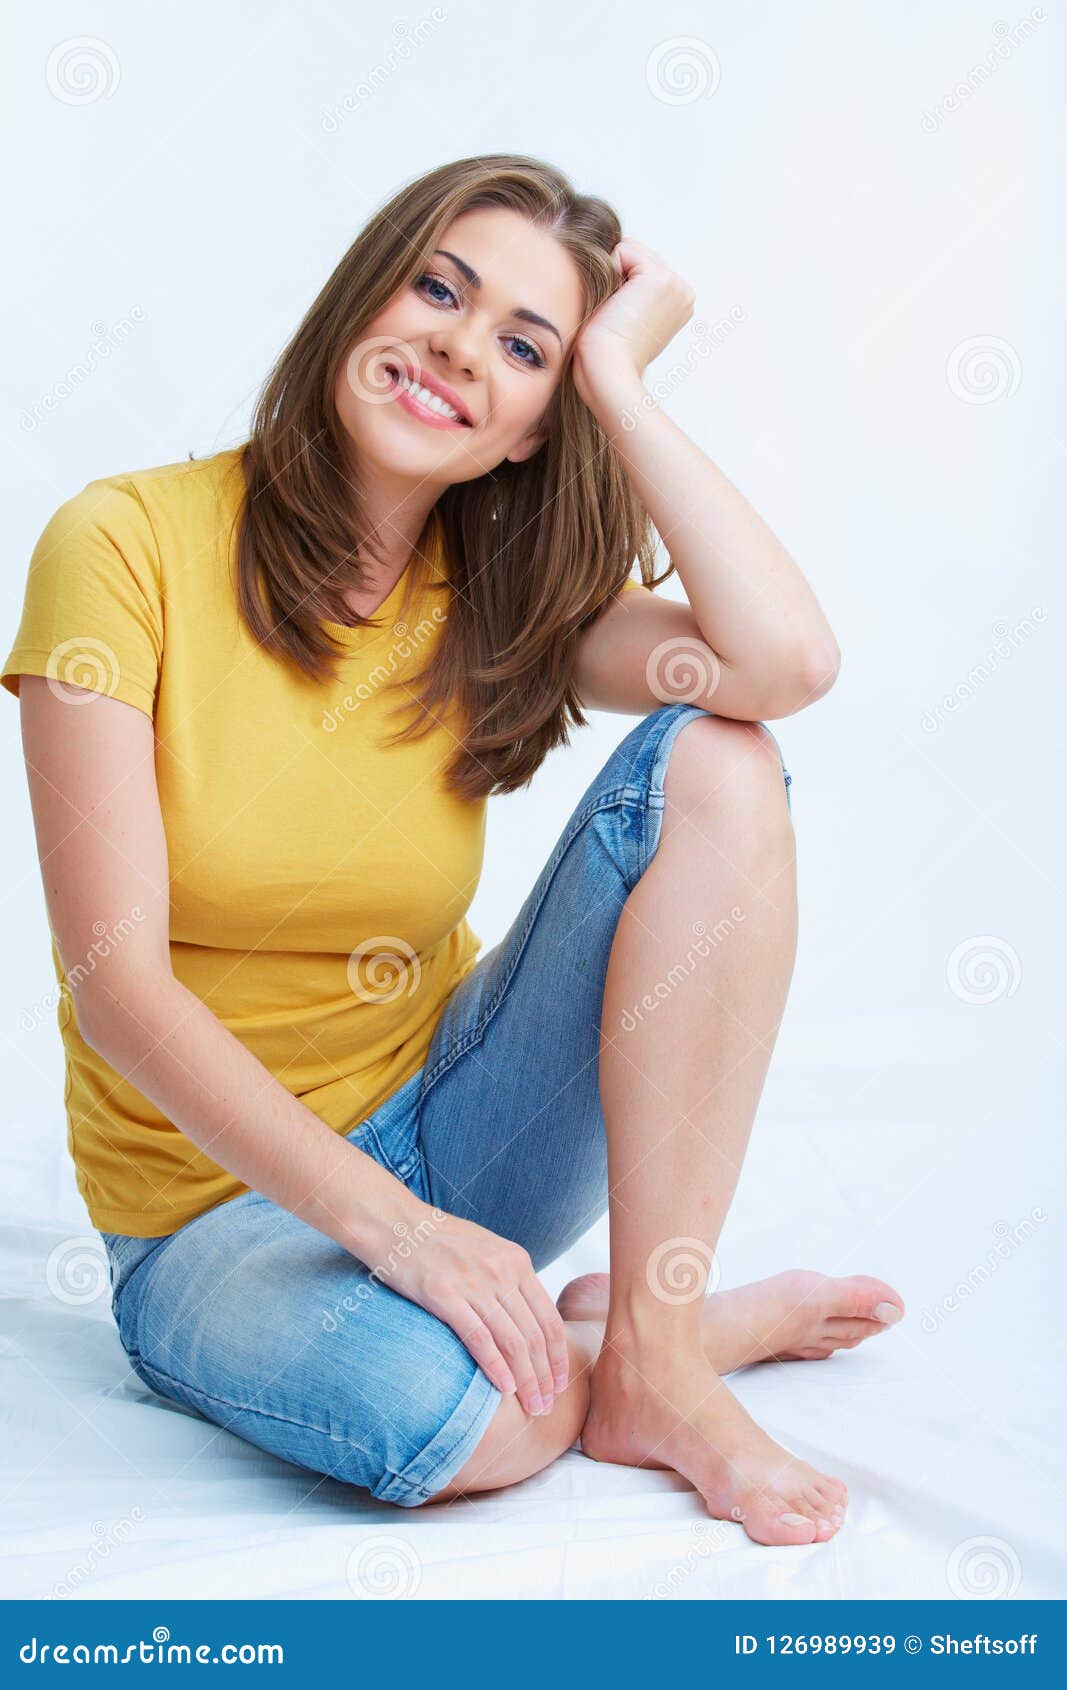 Yong Woman Sitting on Floor, Stock Image - Image of beauty, background ...